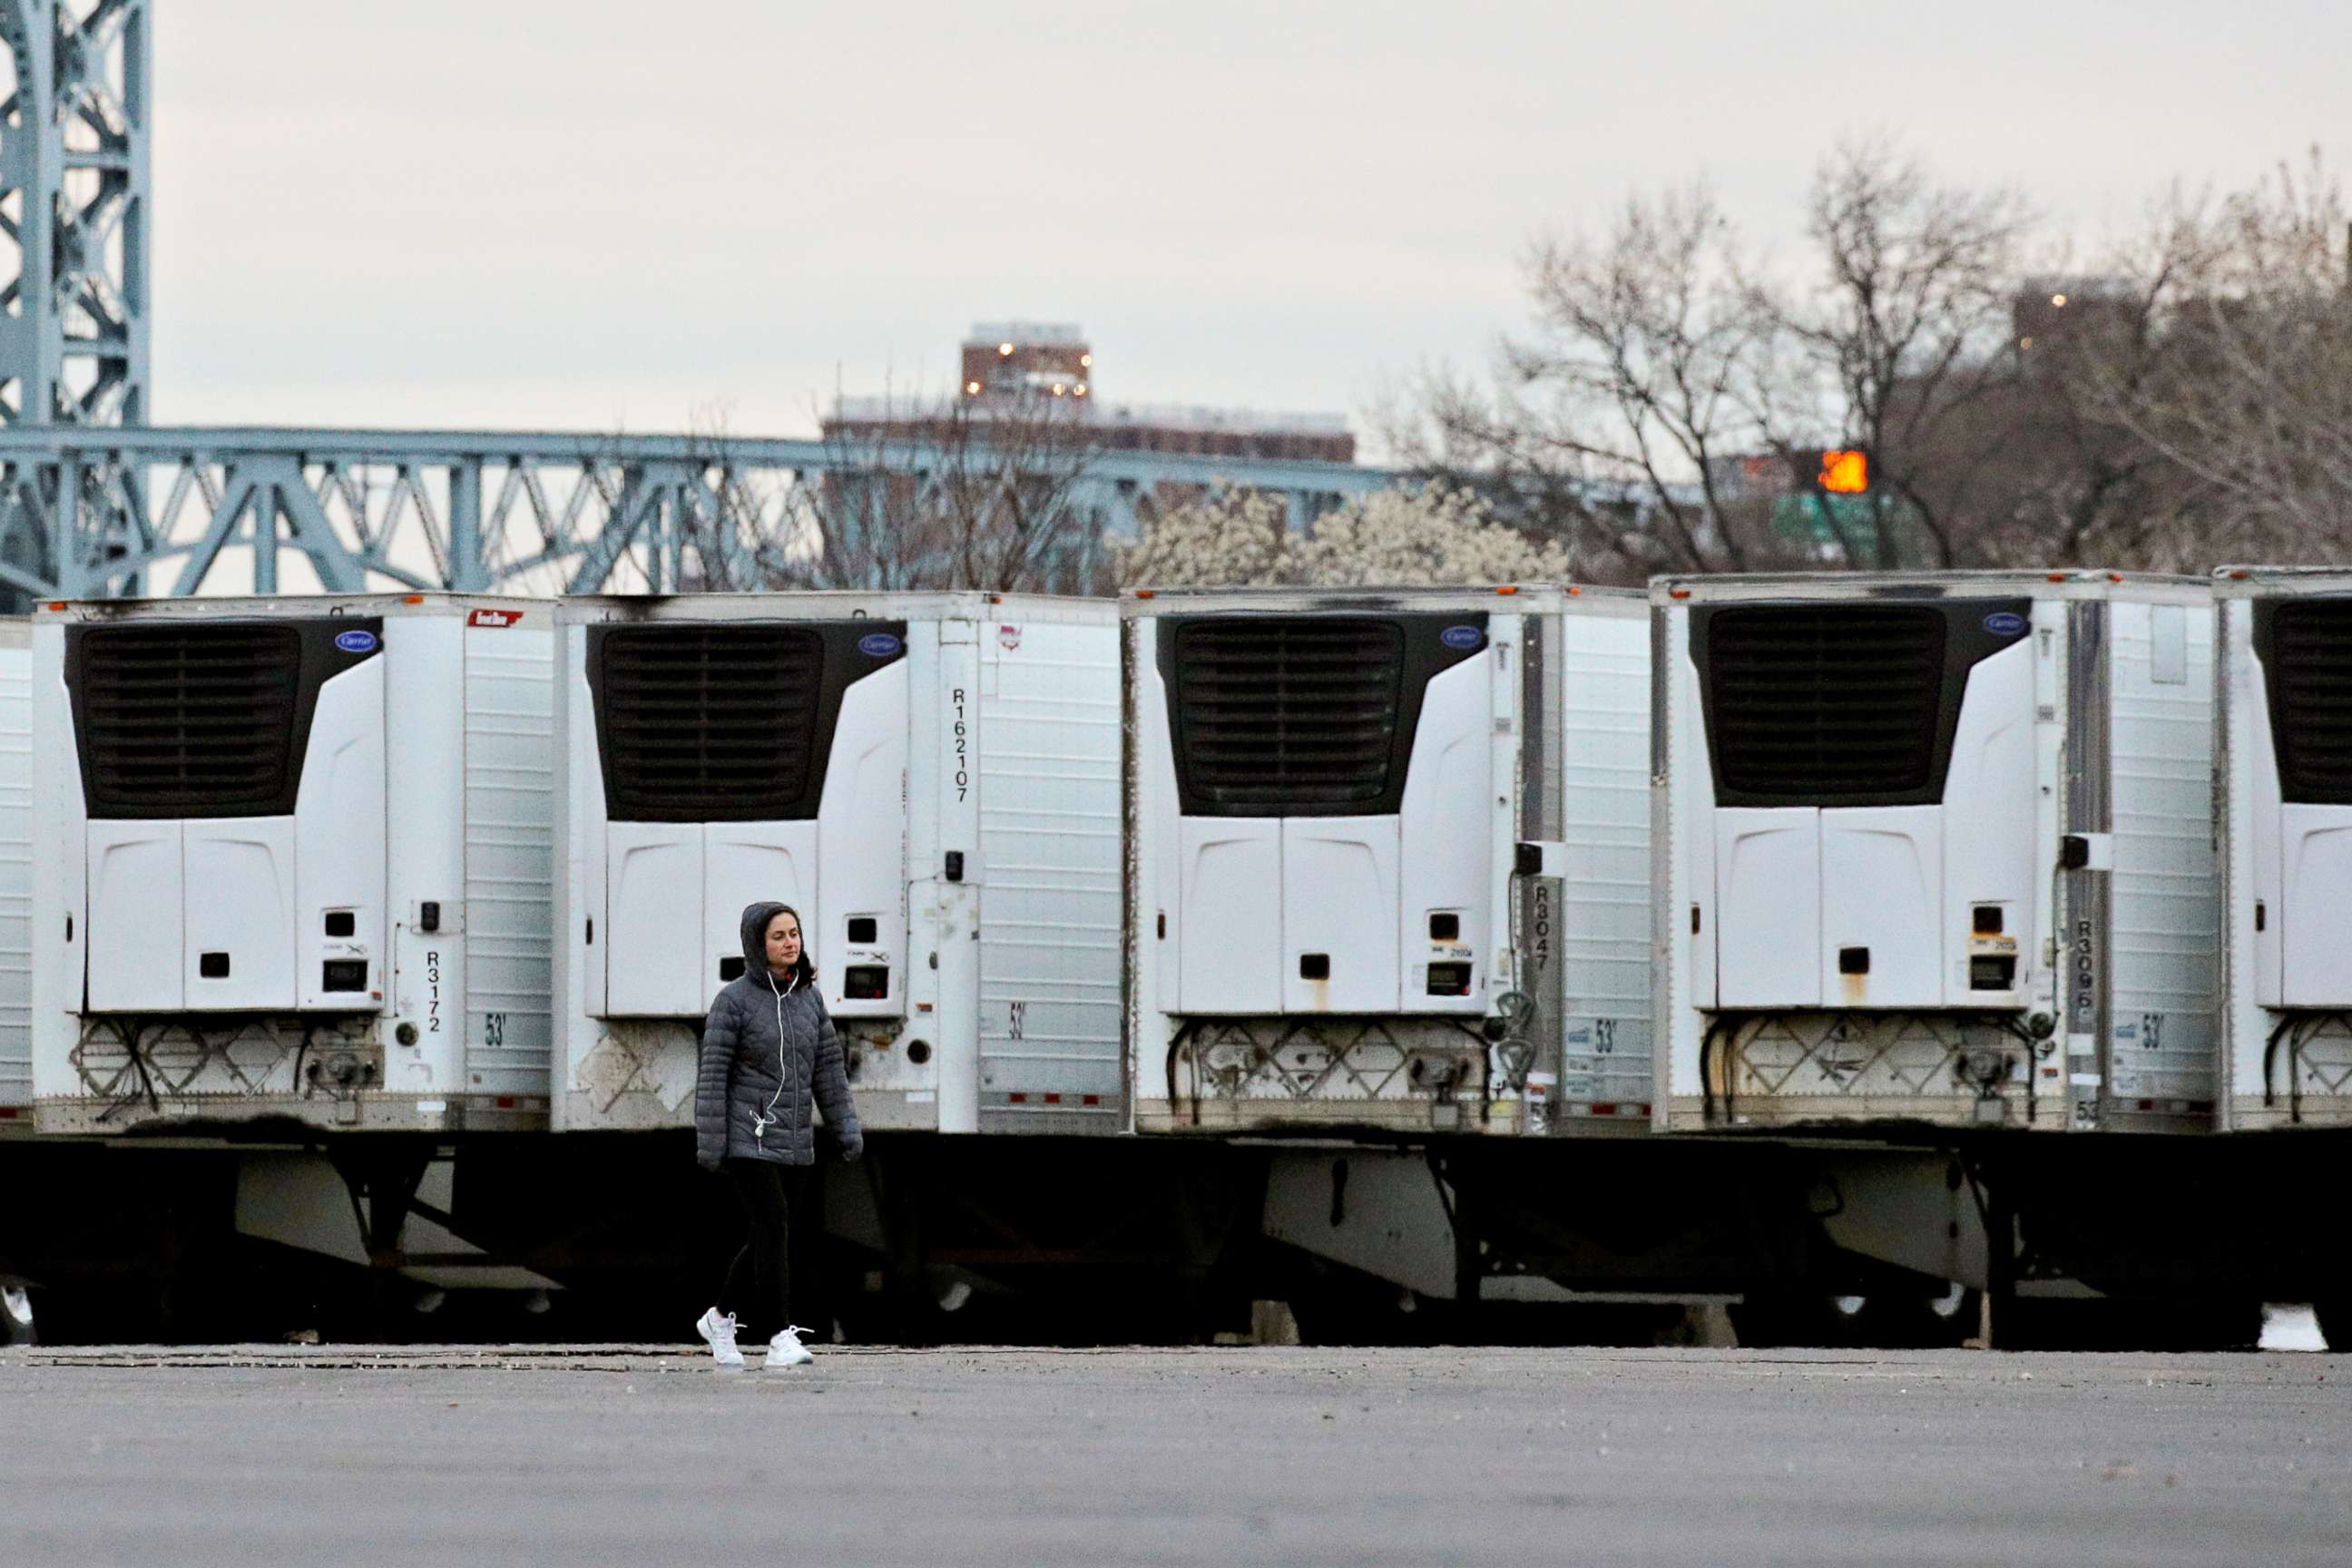 PHOTO: Refrigerated tractor trailers that can be used by hospitals as makeshift morgues are seen in Icahn Stadium parking lot on Randall's Island, in New York City, March 31, 2020.